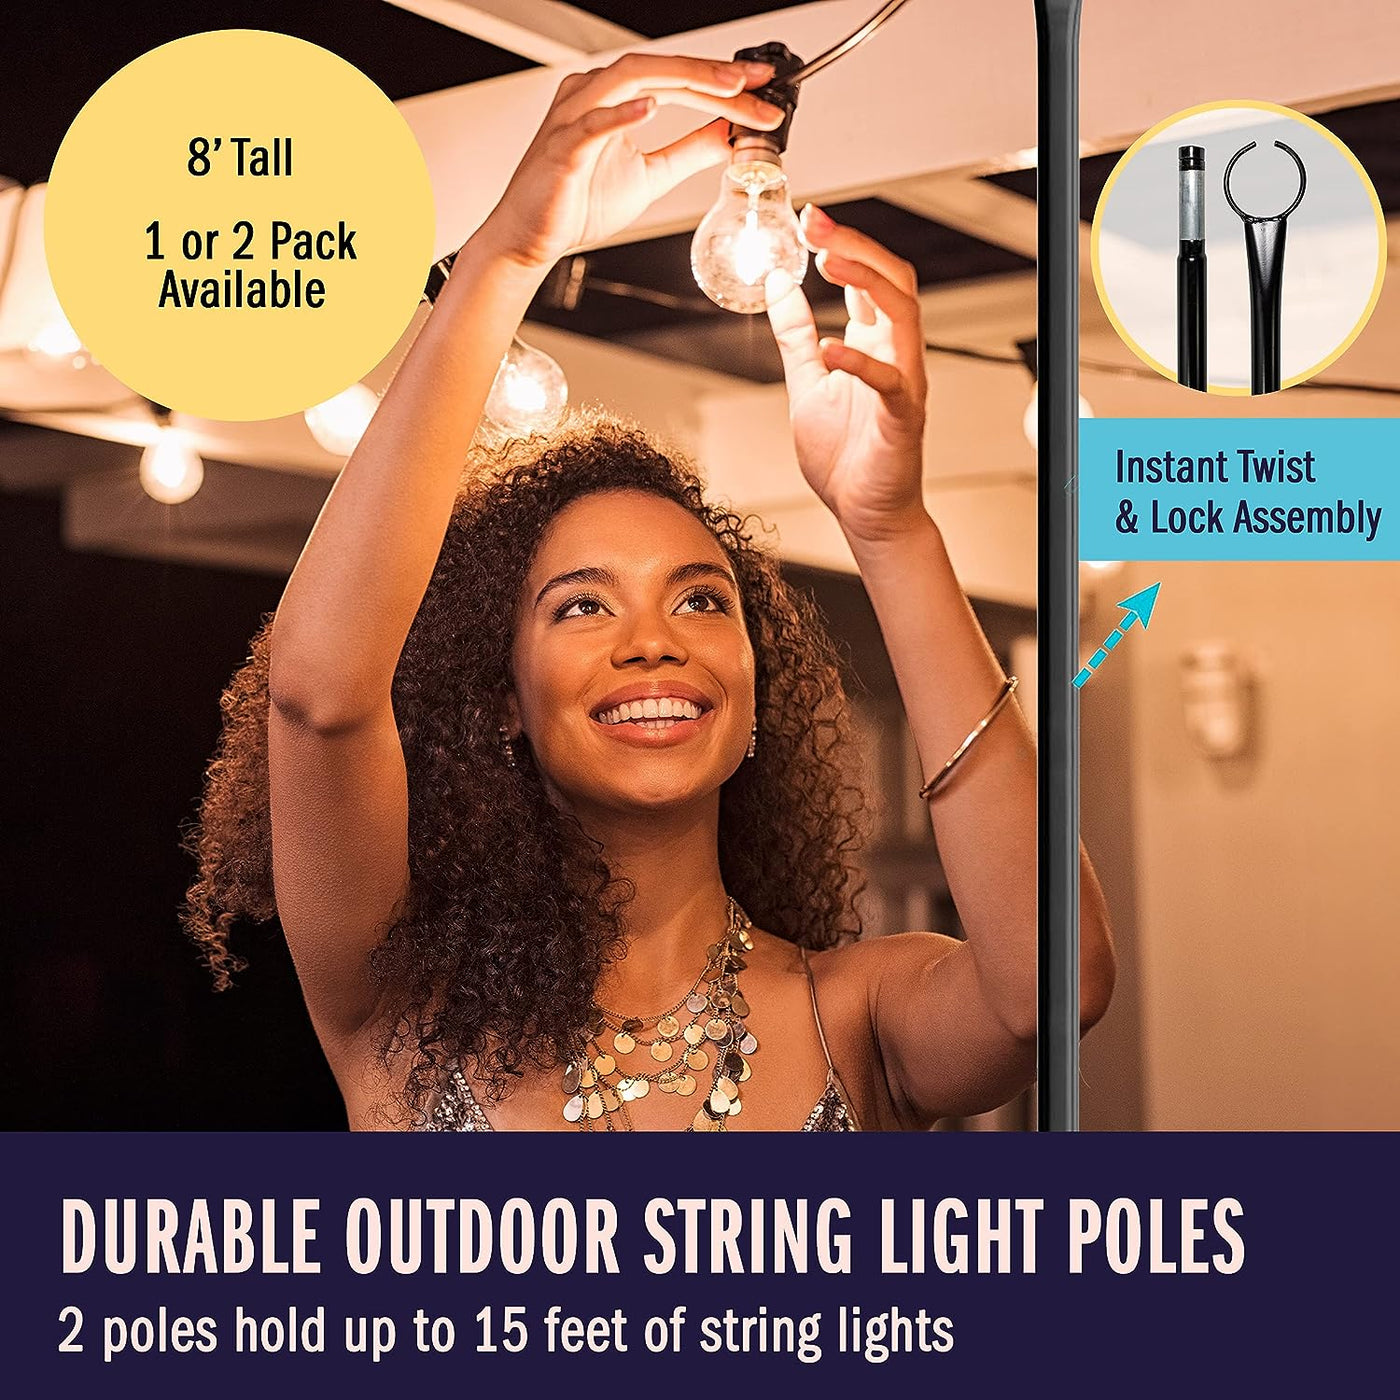 Holiday Styling String Light Poles for Outdoor String Lights (Yard Pole - 2 Pack) - $35